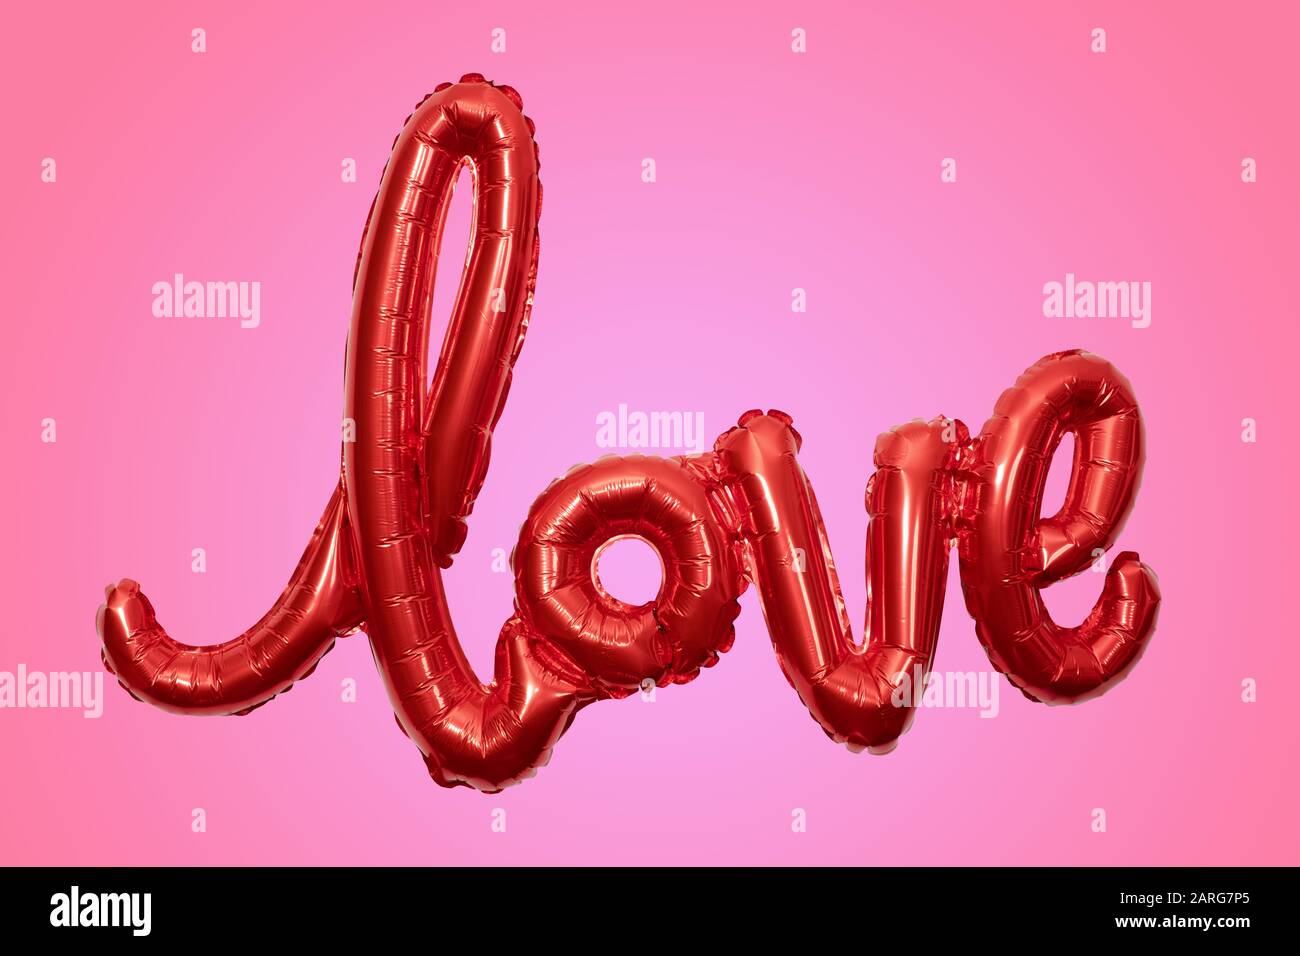 Inflated party balloon forming the word love on pink background Stock Photo